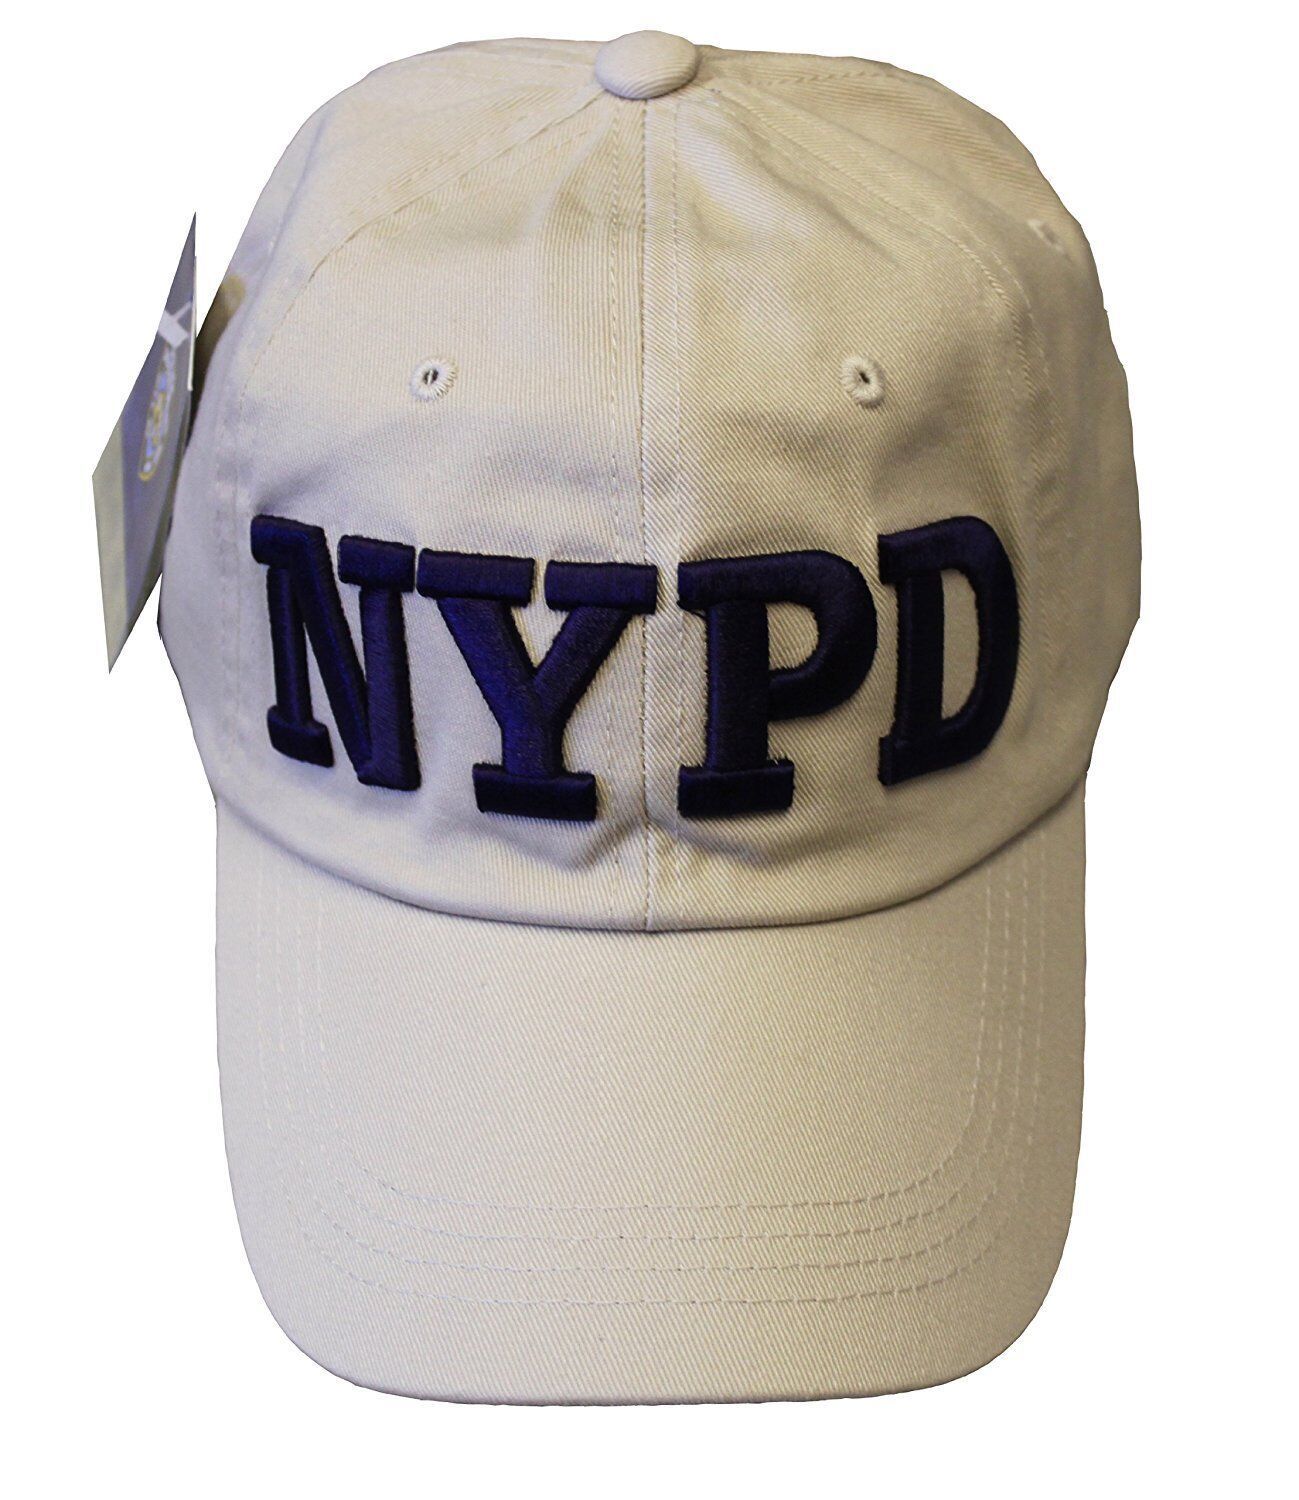 NYPD Baseball Hat New York Police Department Khaki Navy One Size 99309 NYPD - $15.99